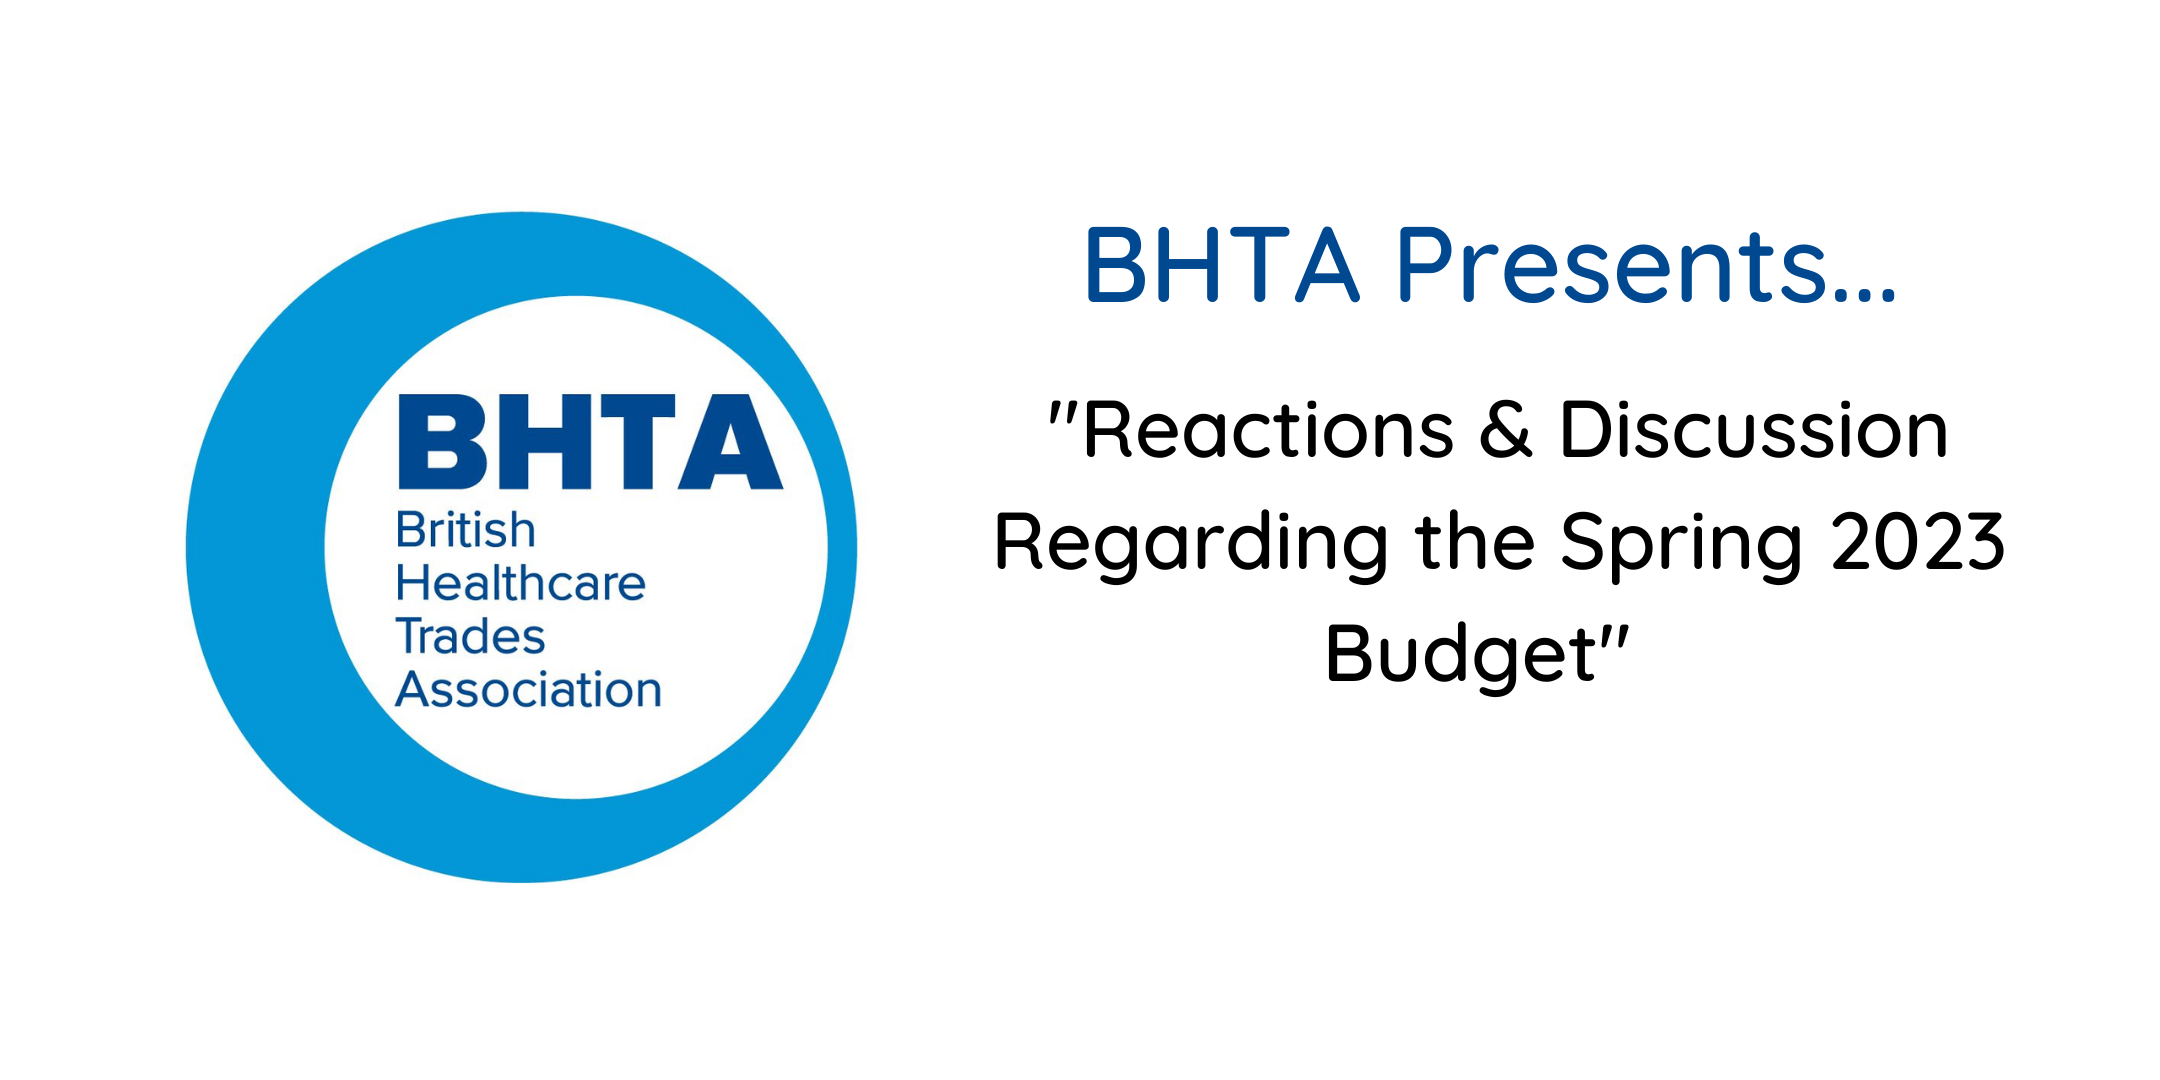 BHTA presents… "Reactions & Discussion Regarding the Spring 2023 Budget"